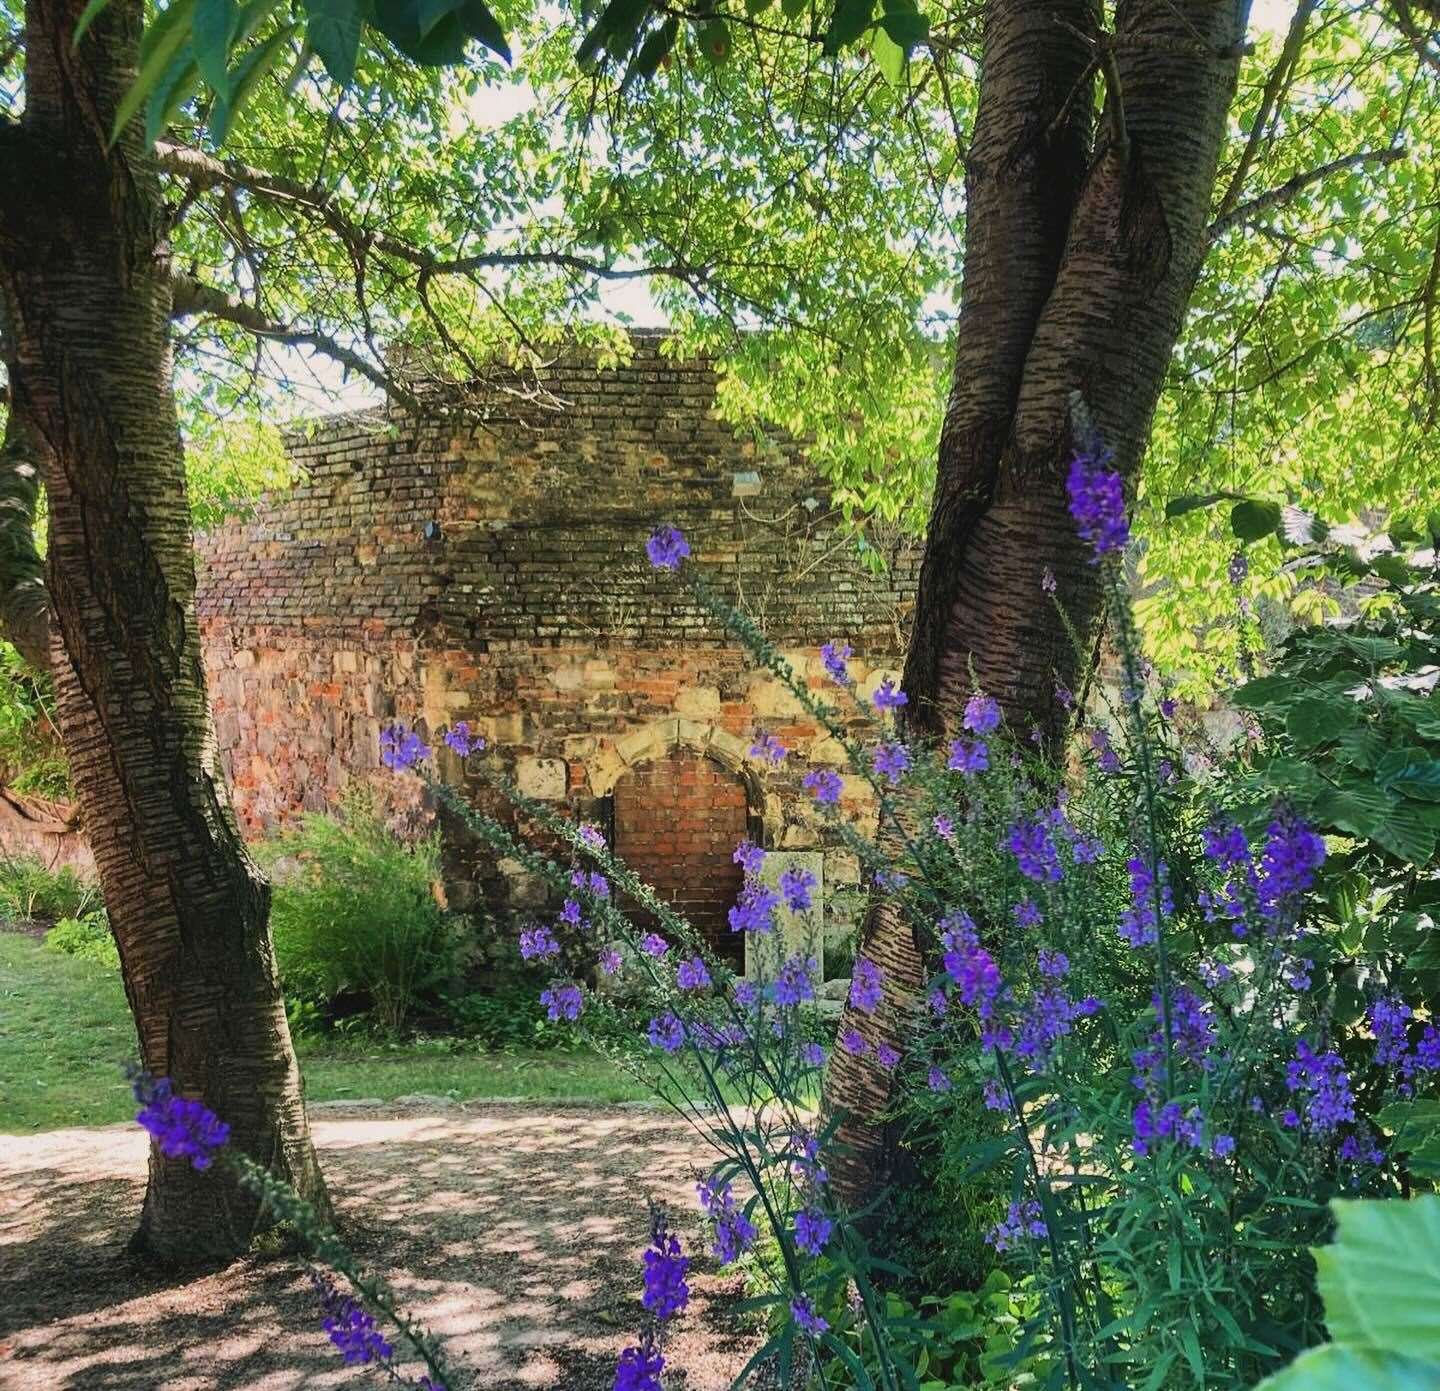 The historic and picturesque Franciscan Gardens in Canterbury remain closed on safety grounds